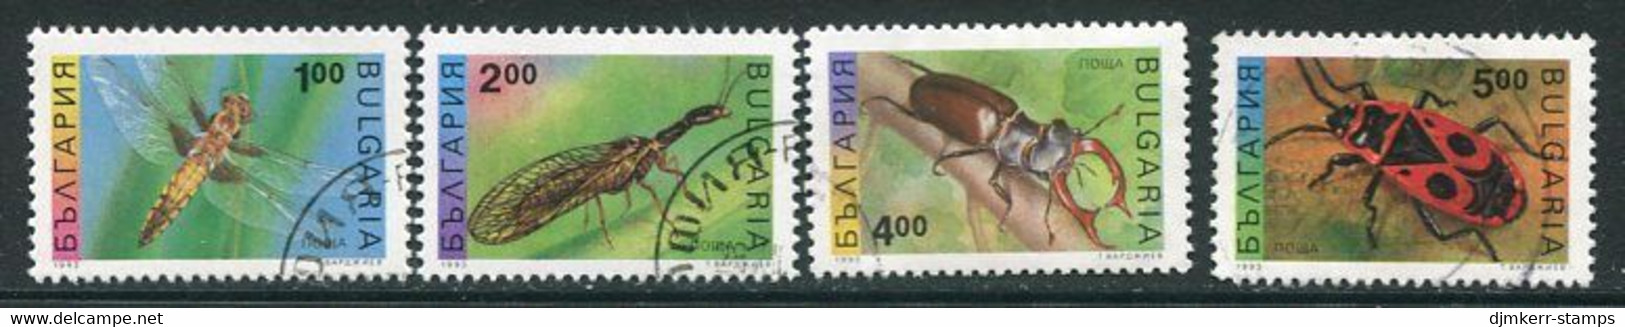 BULGARIA  1993 Defibitive: Insects Used.  Michel 4093-96 - Usados